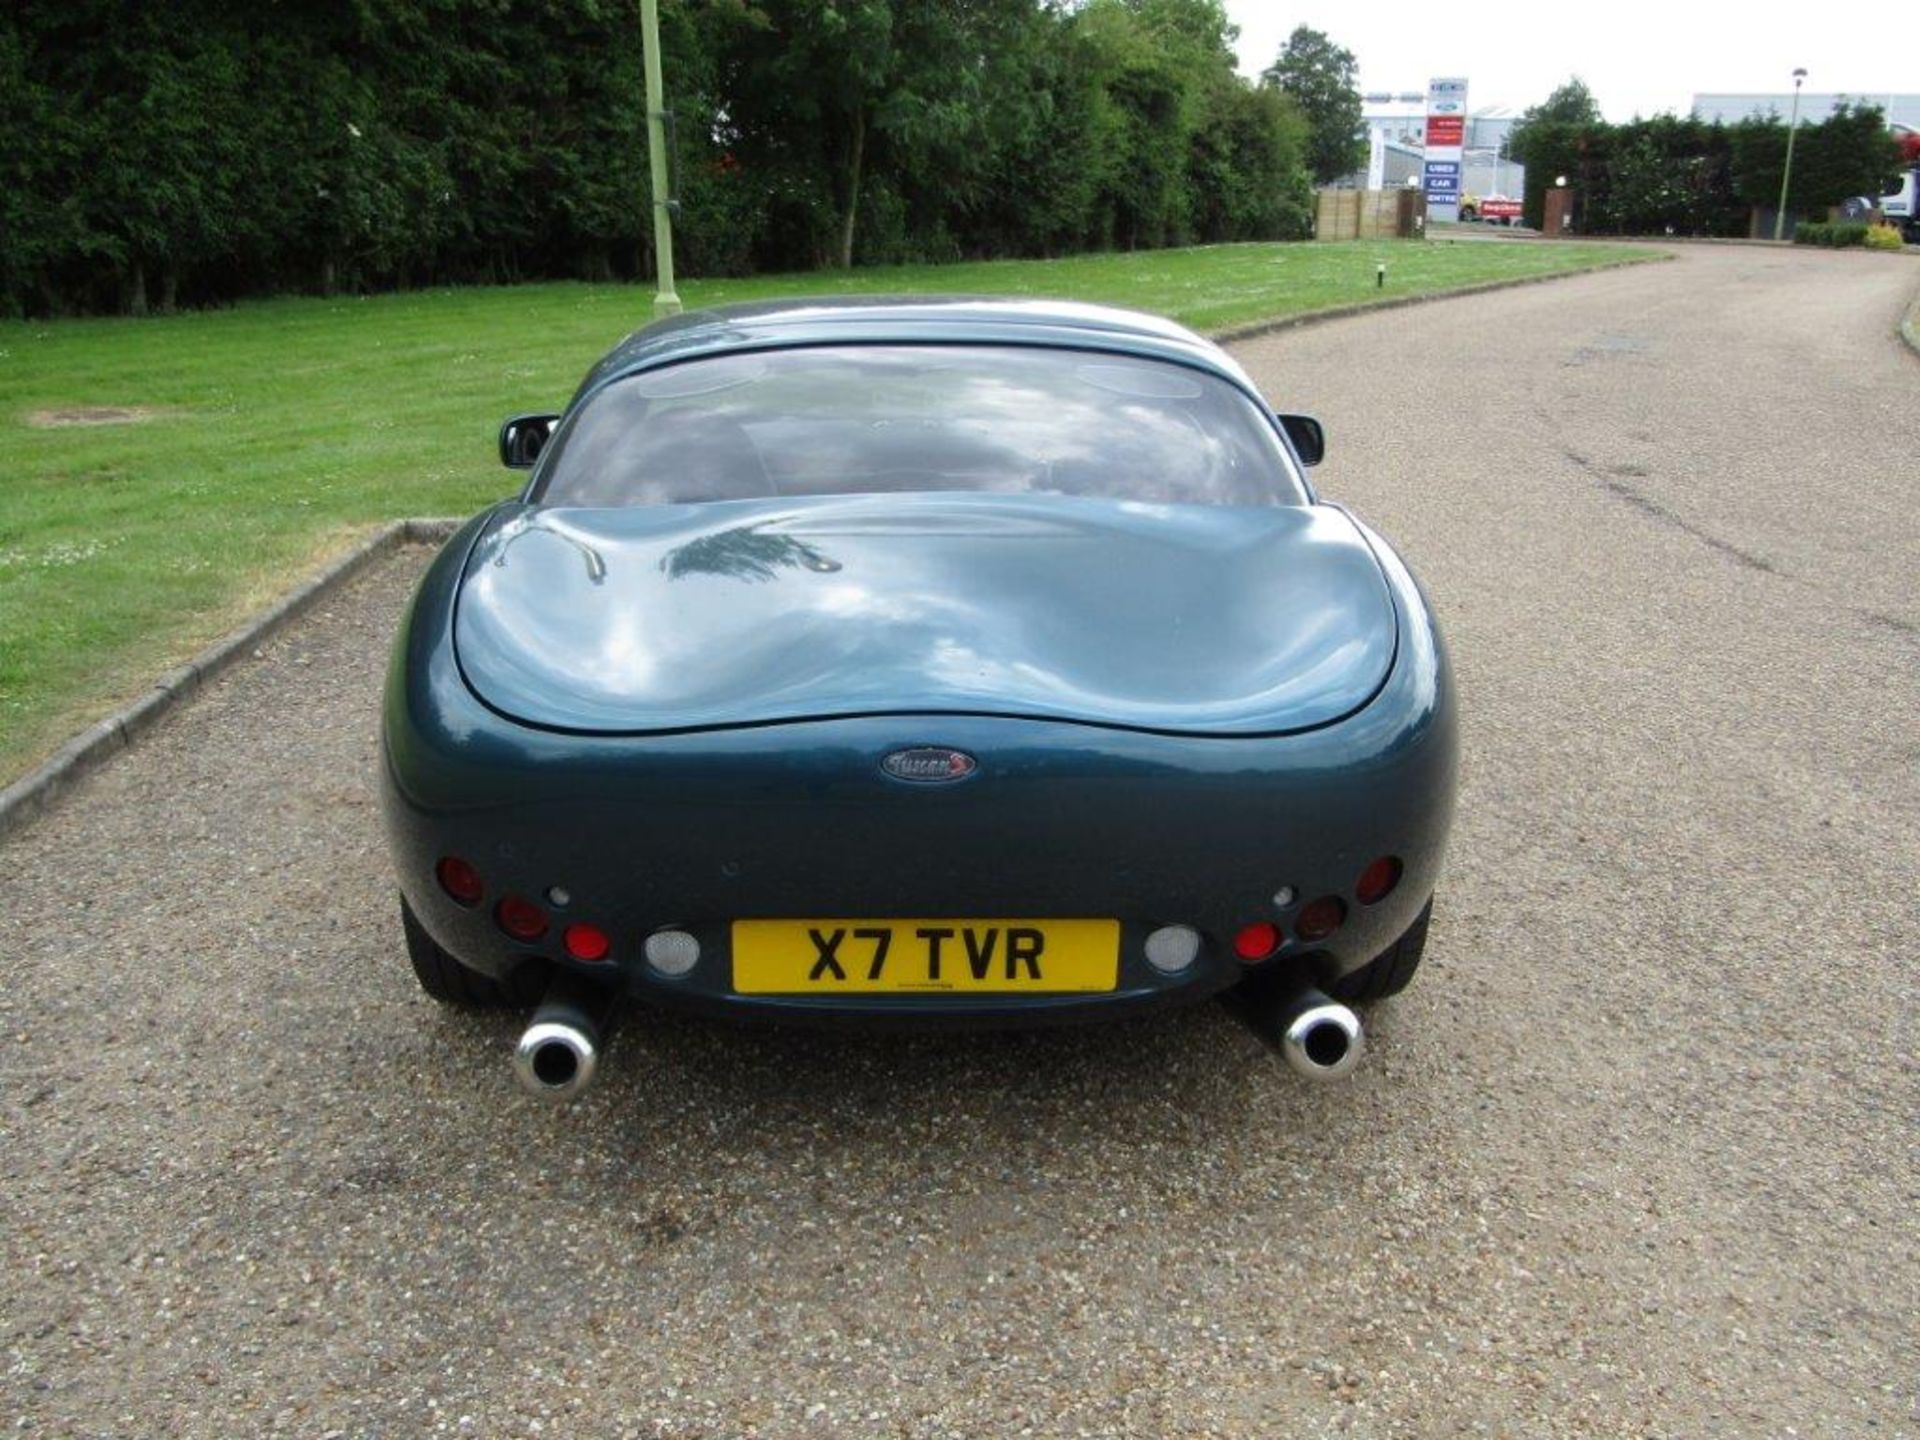 2000 TVR Tuscan 4.0 Speed Six - Image 7 of 16